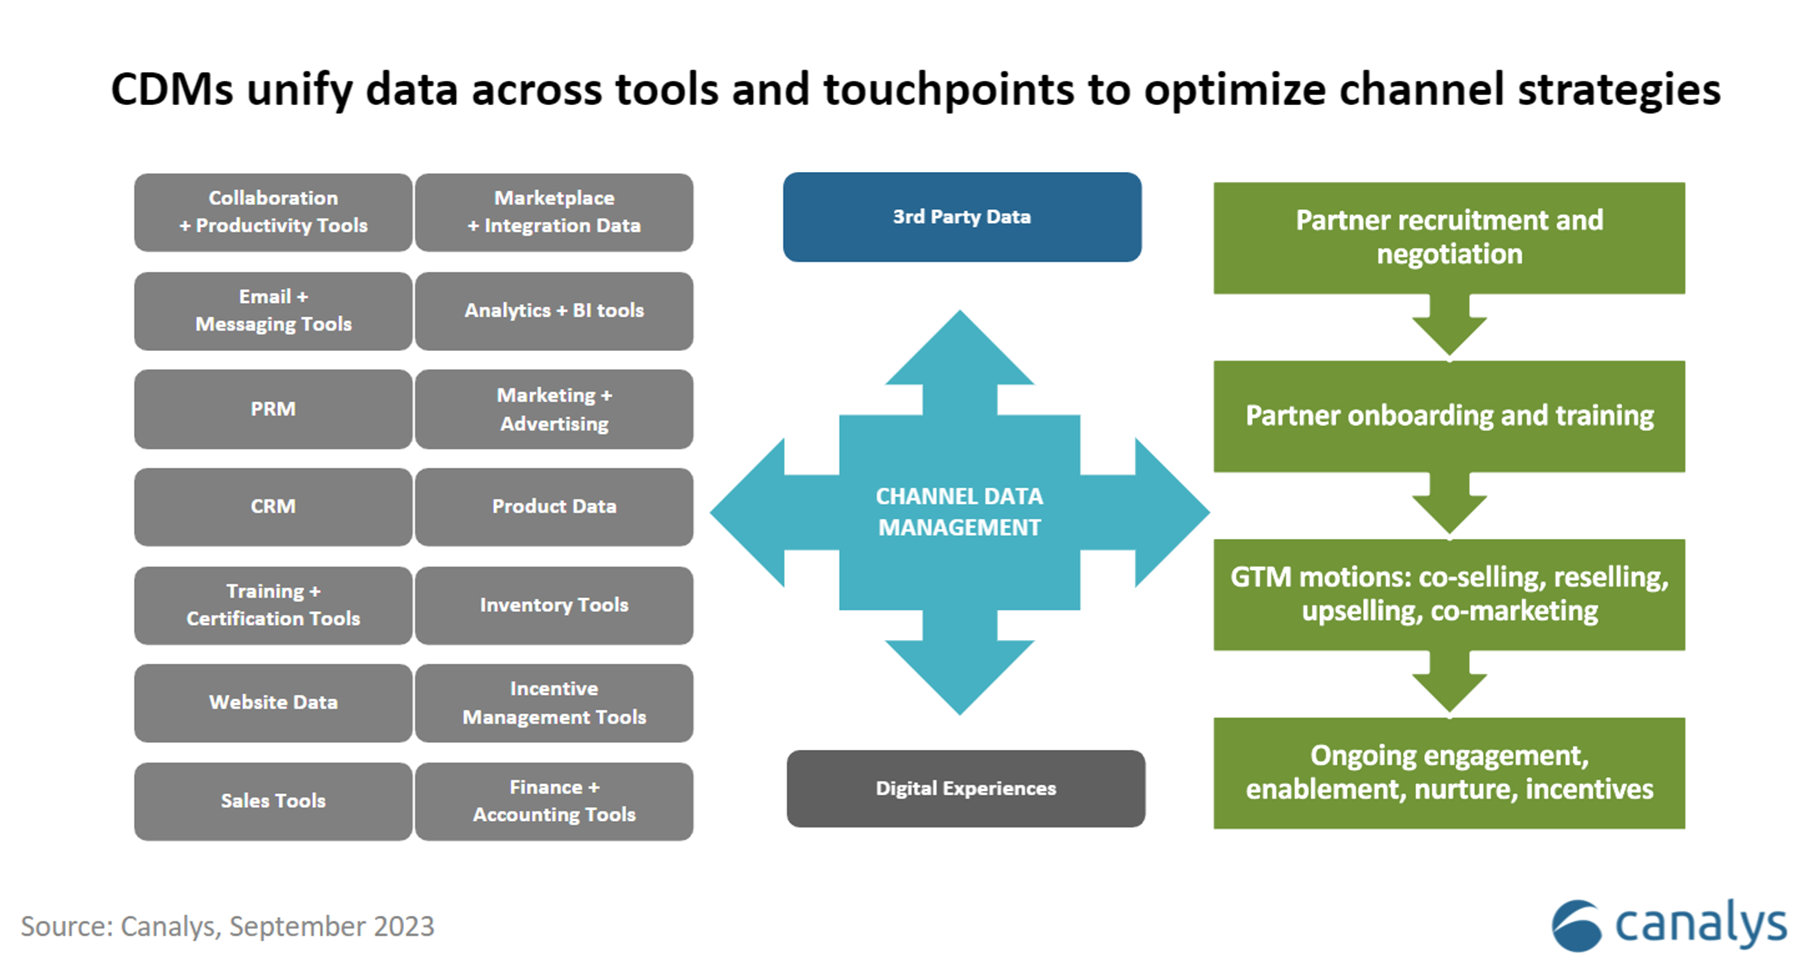 Channel Data Management tools give vendors and partners a clear advantage